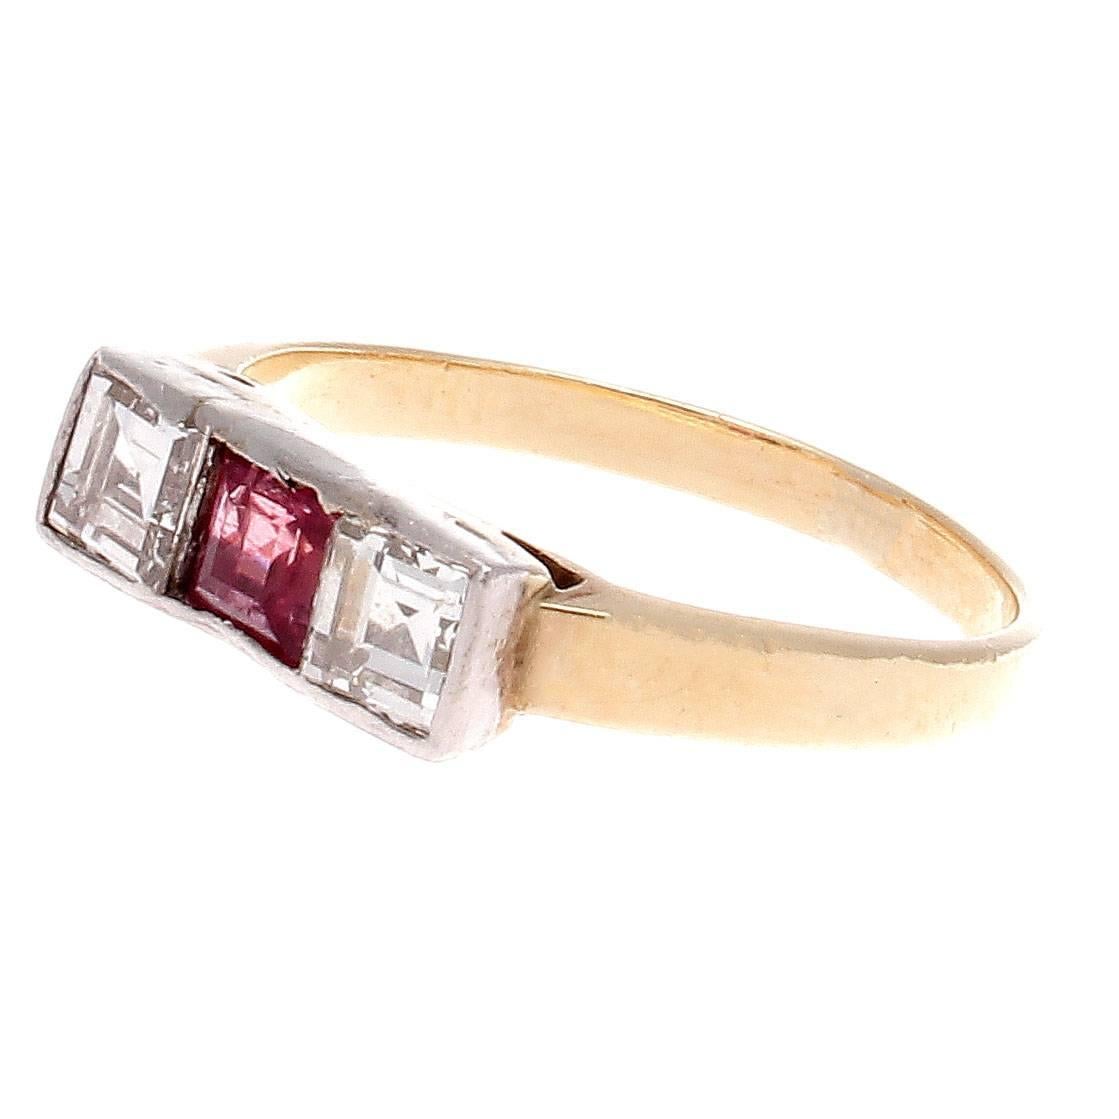 Dazzling refinement in the classic art deco symmetrical design. Featuring a vibrant asscher cut reddish-pink ruby accented on either side by an asscher cut white, clean diamond. Hand crafted in platinum and 18k yellow gold.

Ring size 4-1/2 and may